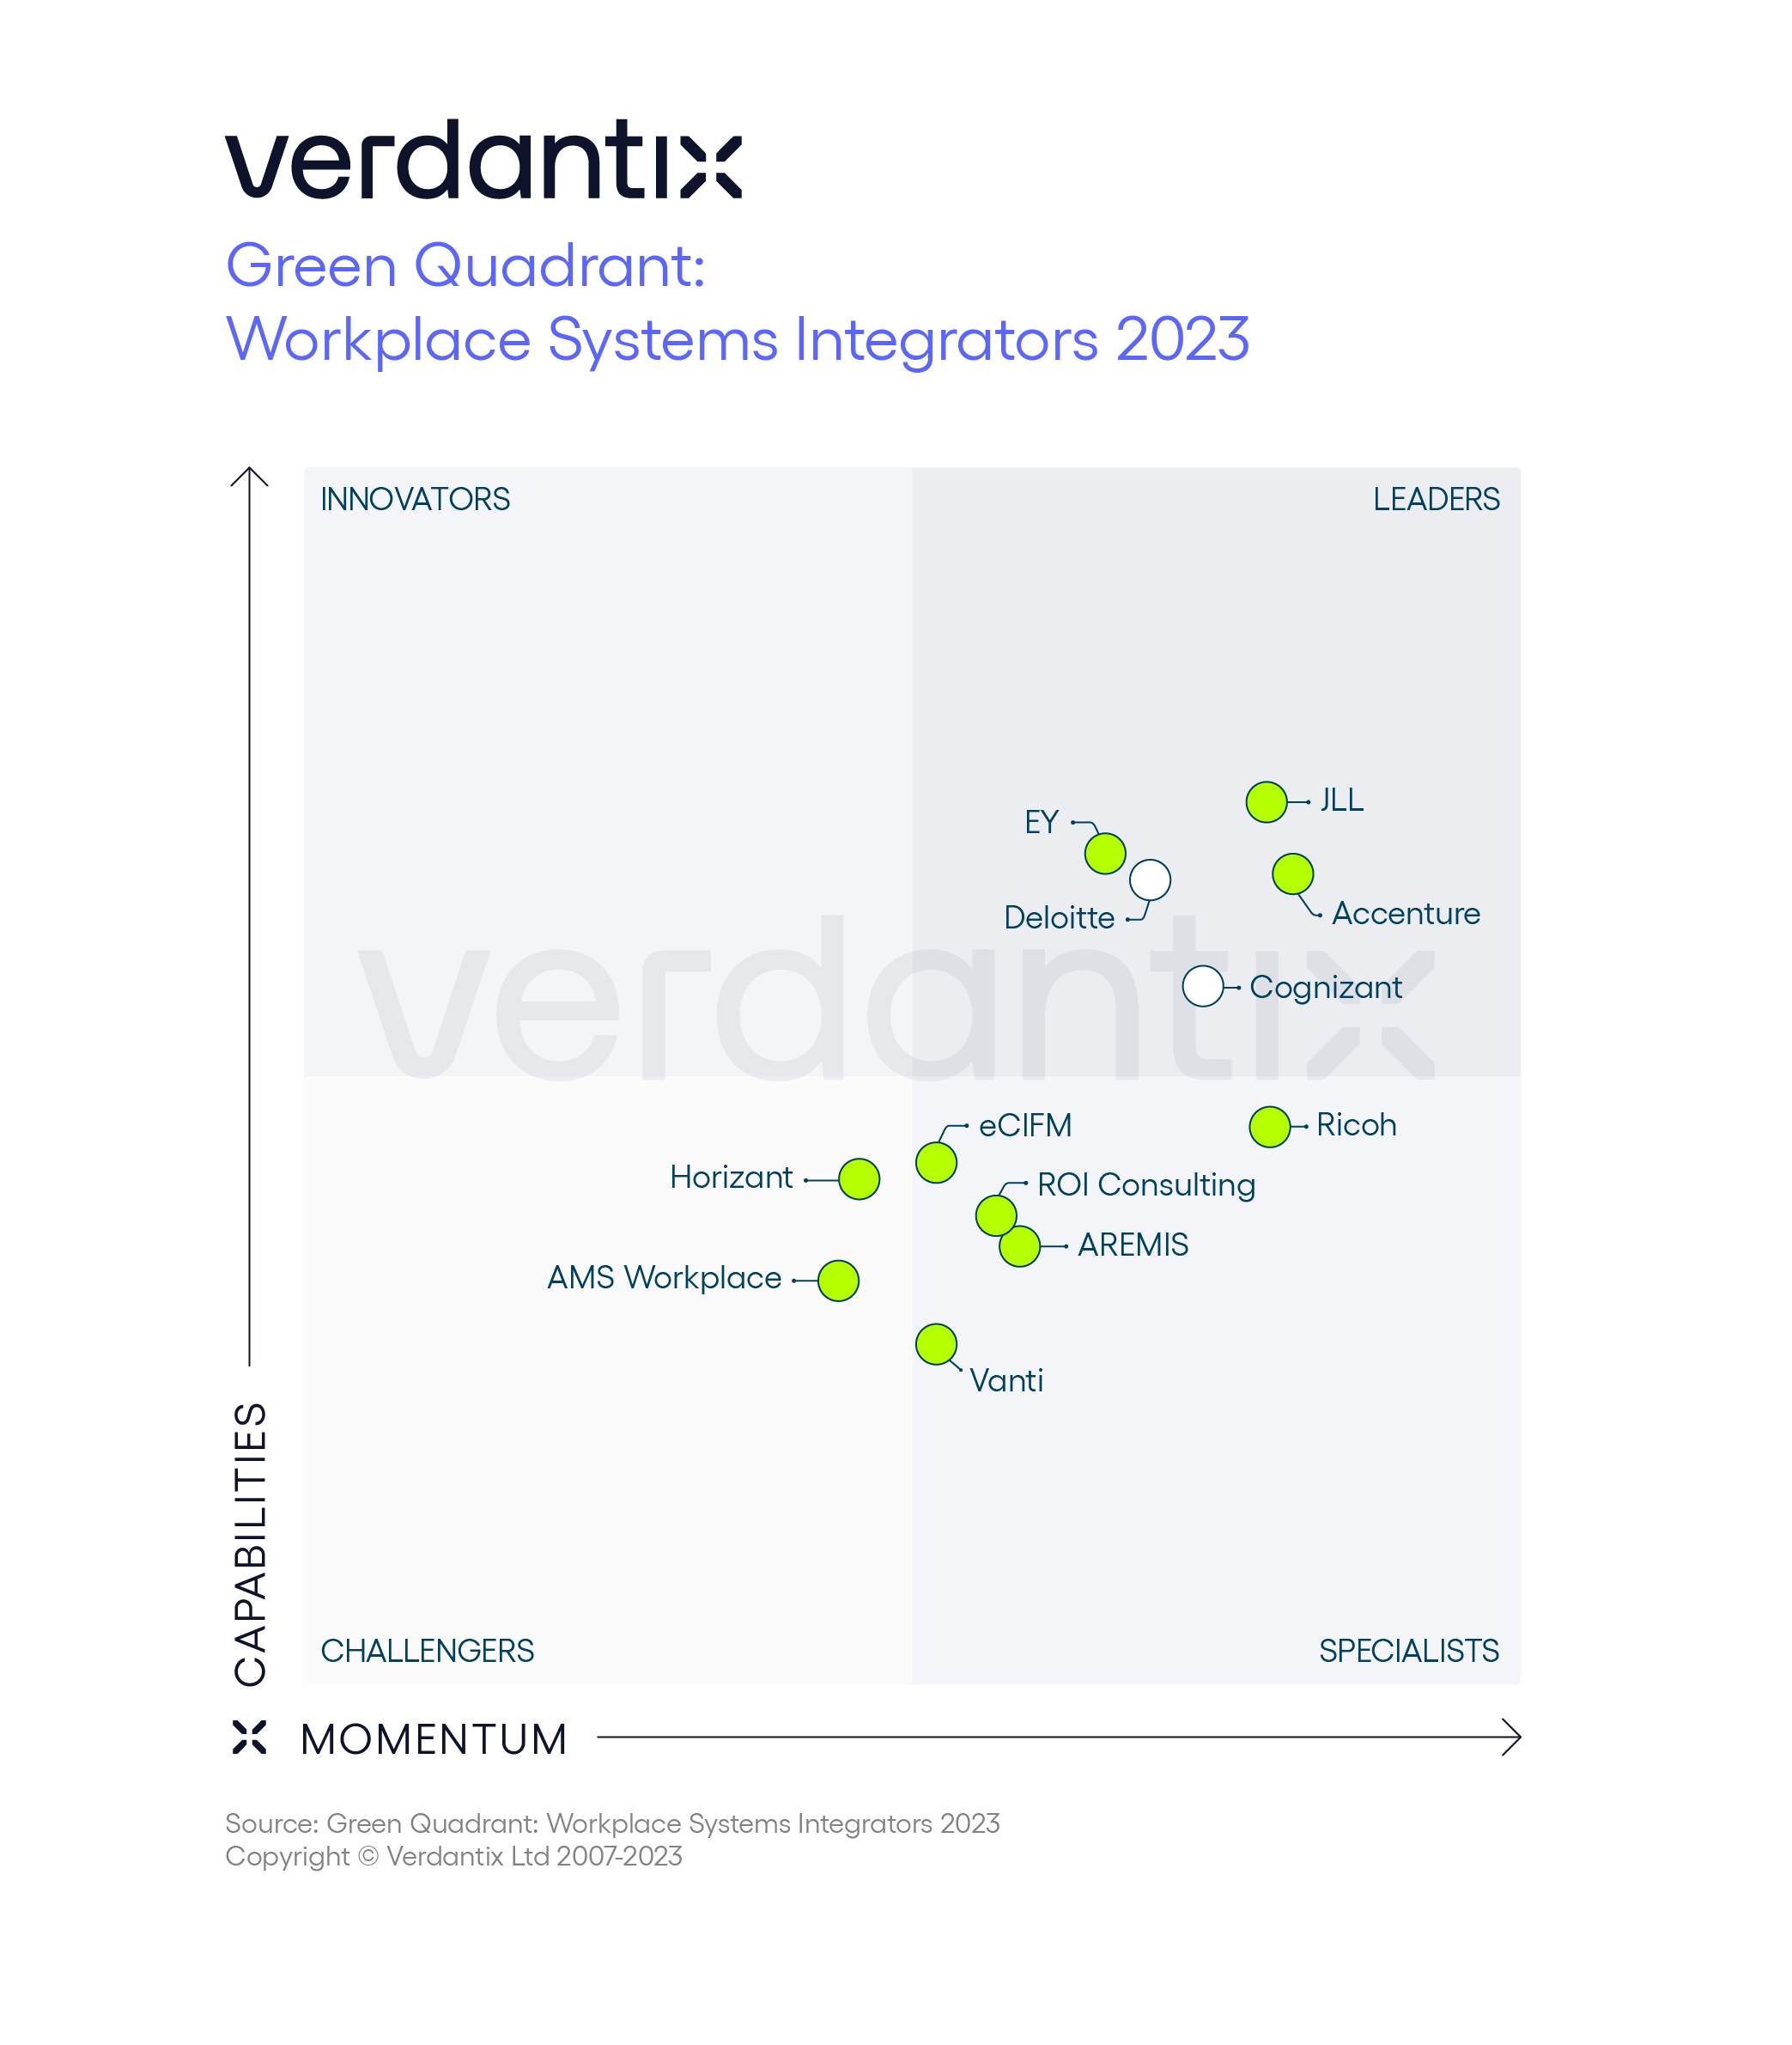 2023 Green Quadrant for Workplace Systems Integrators